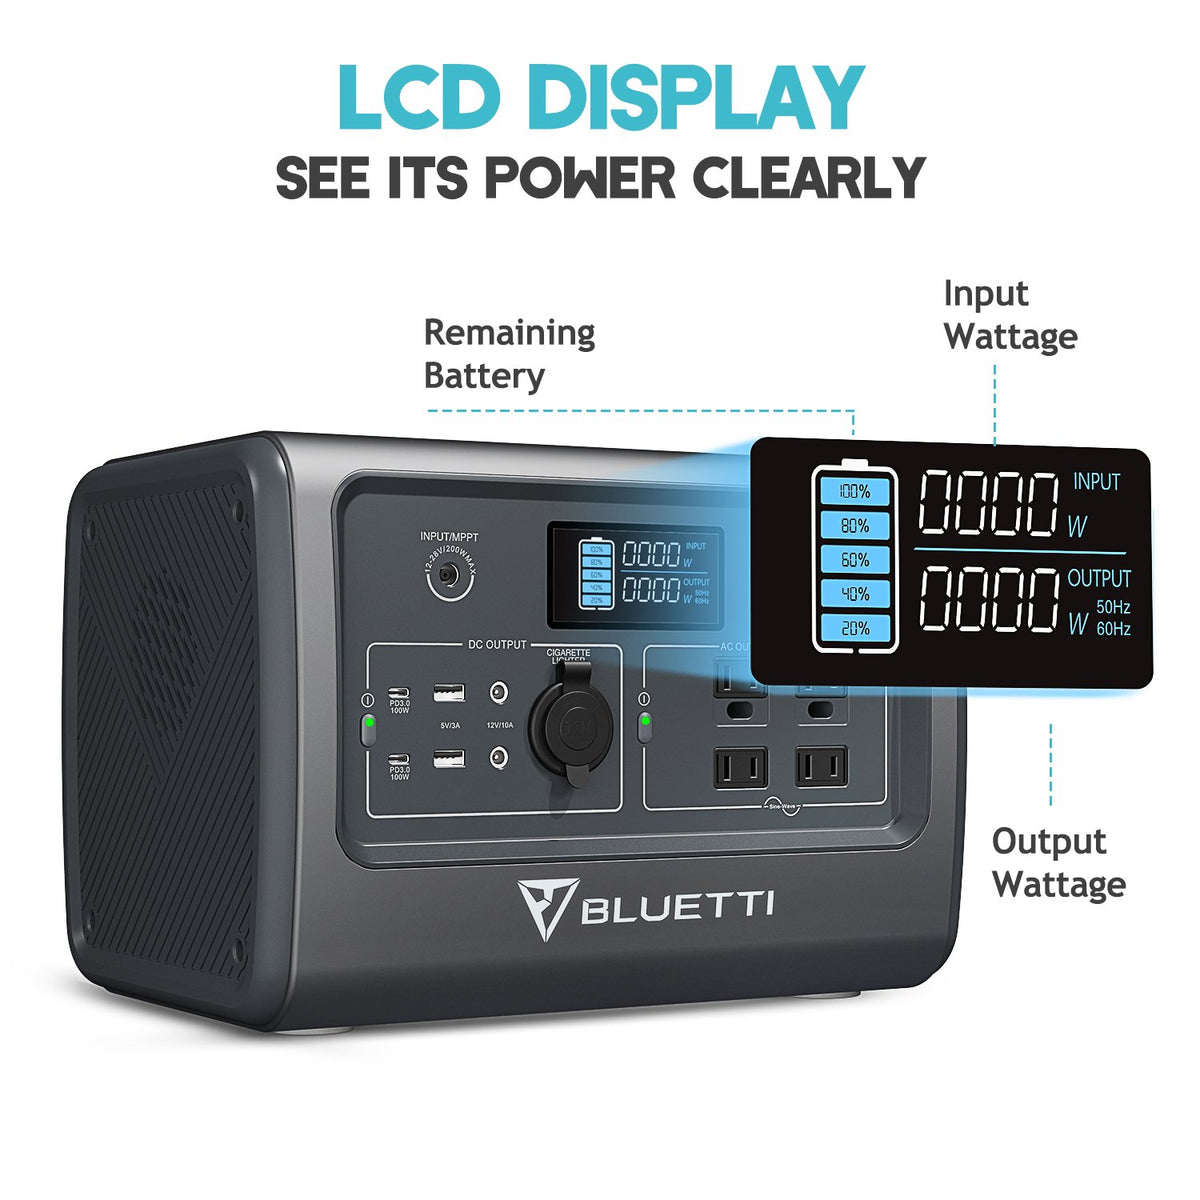 The LED display on EB70S tells you the real-time input and output power rate, as well as the information on how long the battery will last with the devices plugged into it.